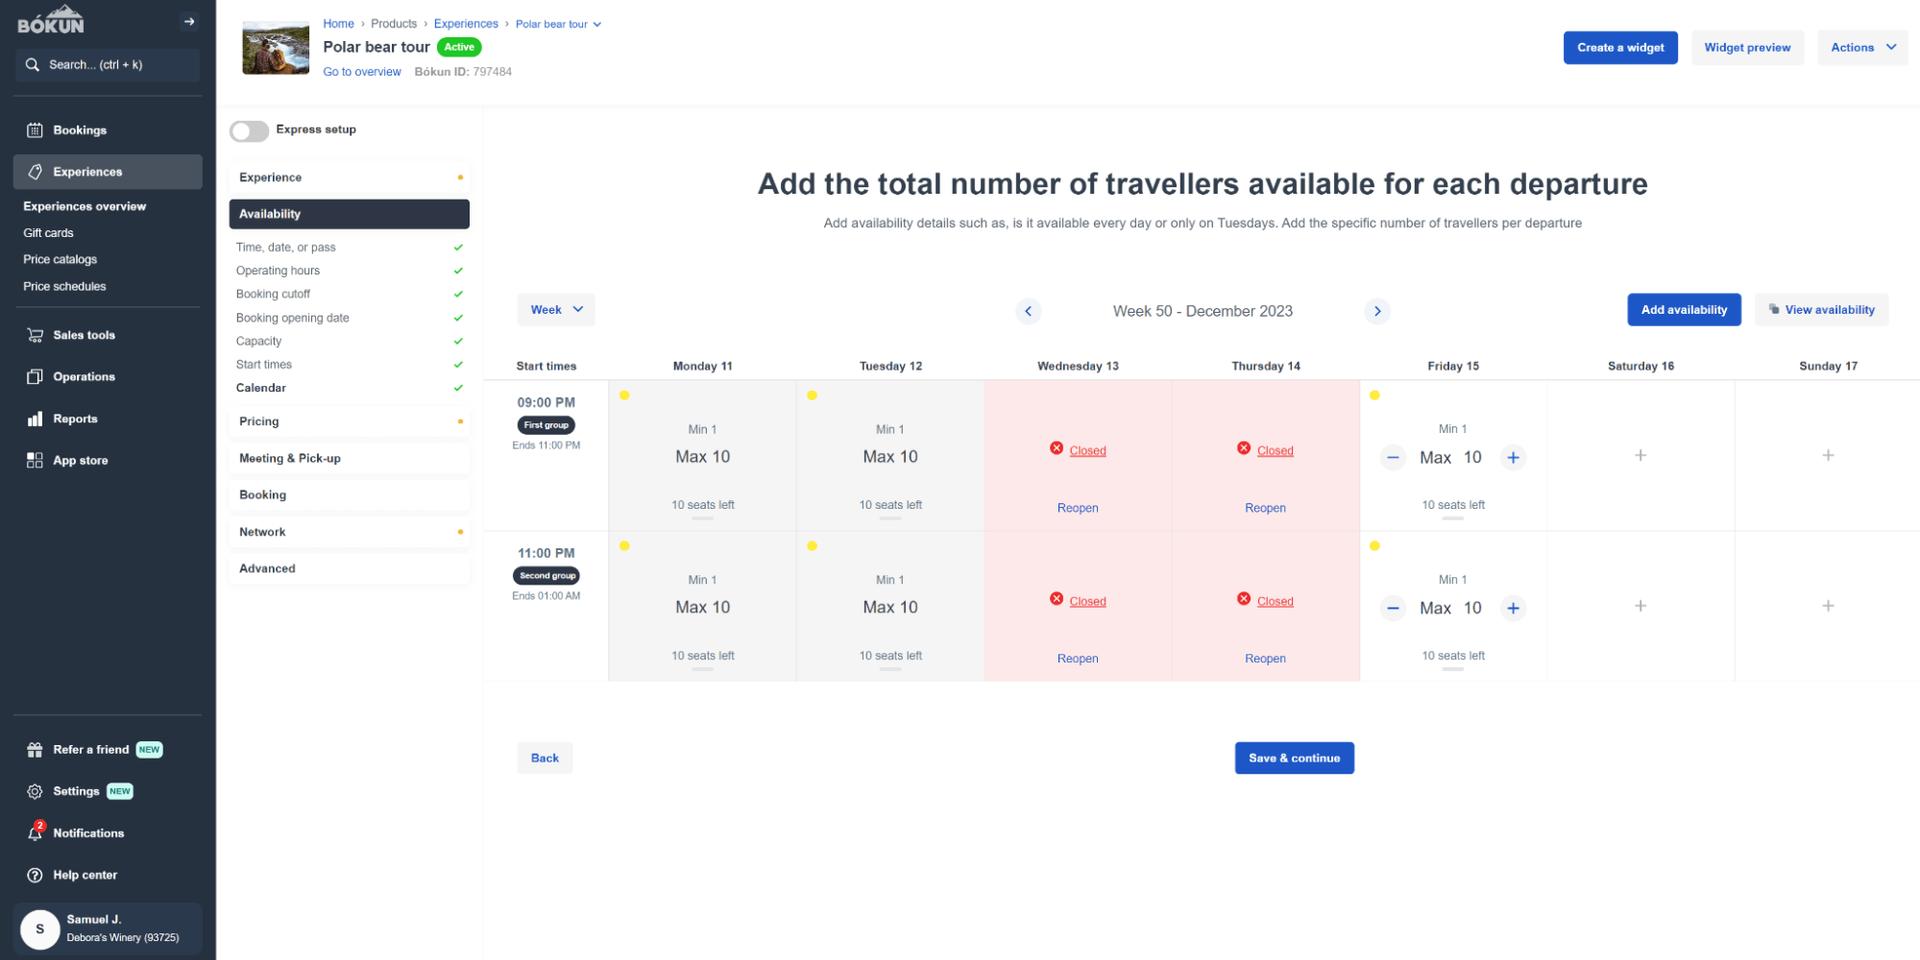 Add the total number of travellers available for each departure (with calendar)